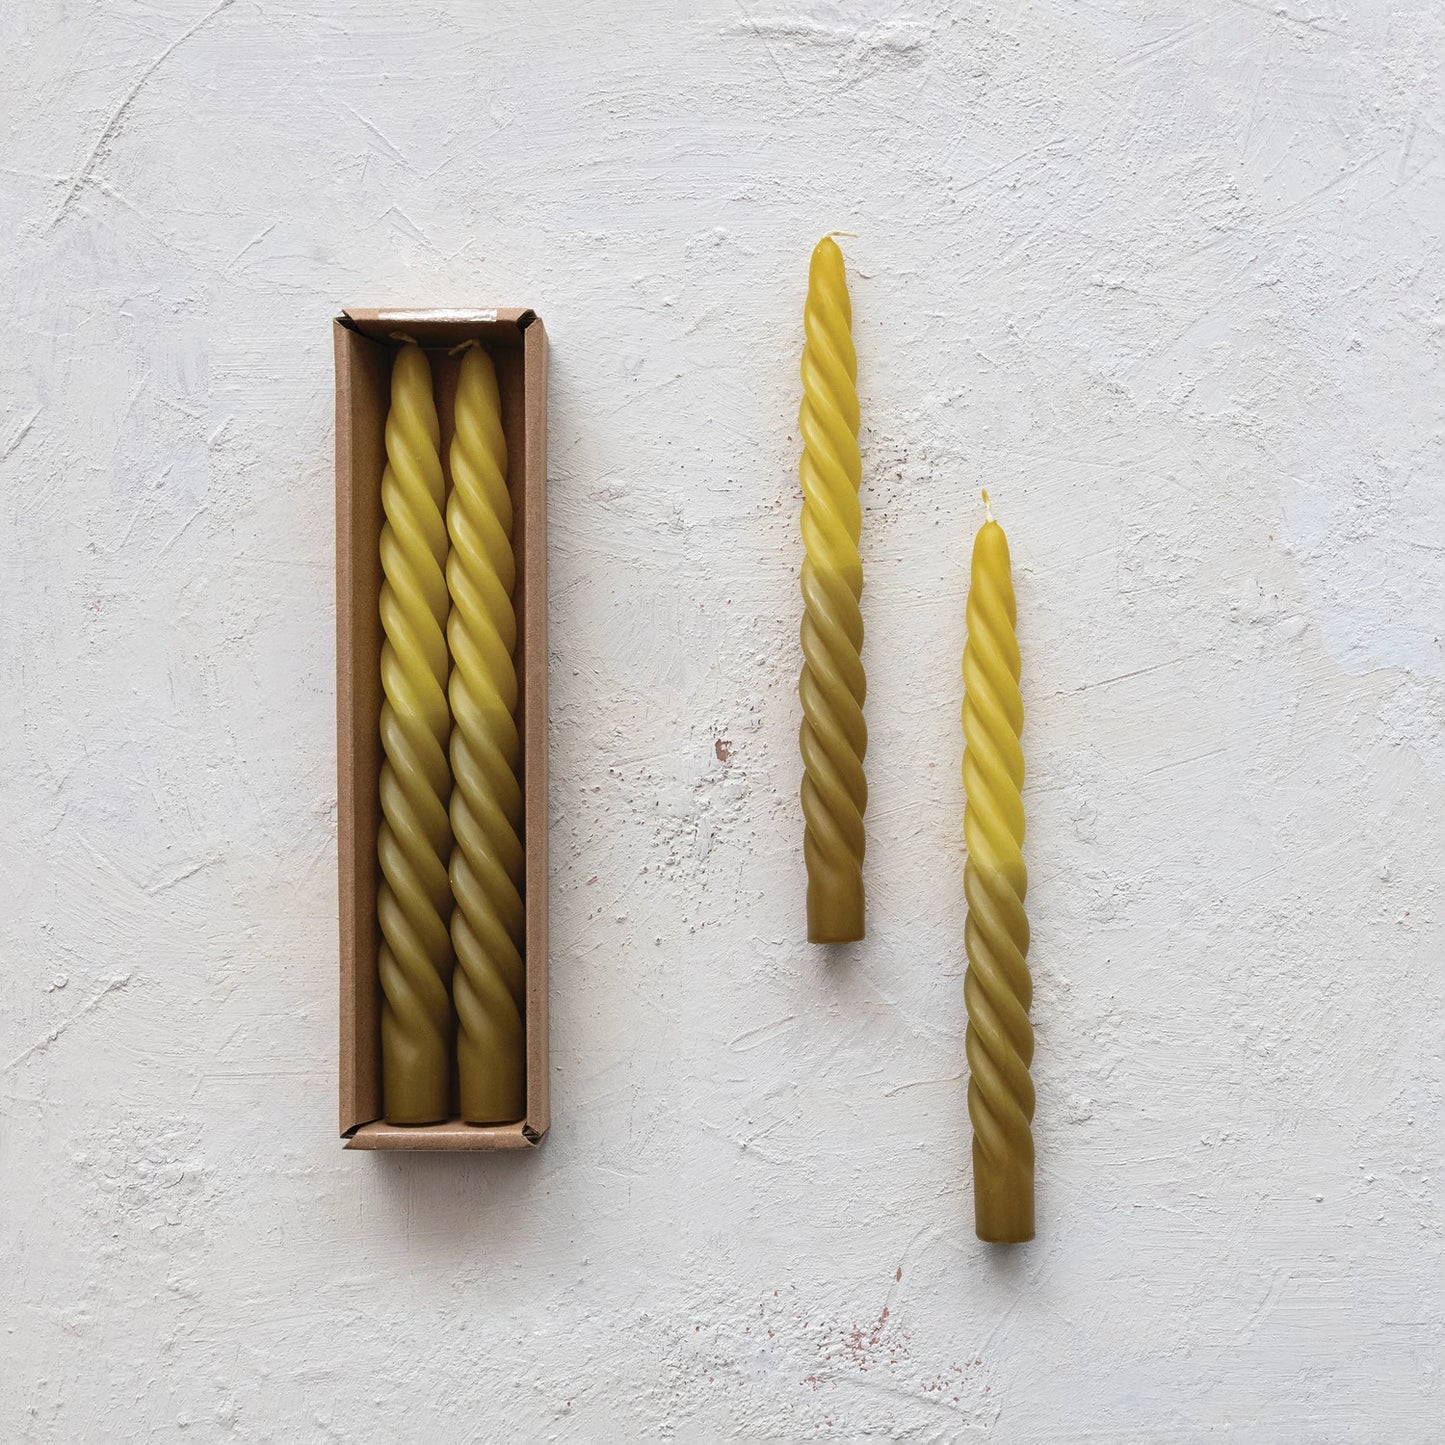  2 ombre green Twisted Taper Candles set next to a boxed set of candles on a plaster background.